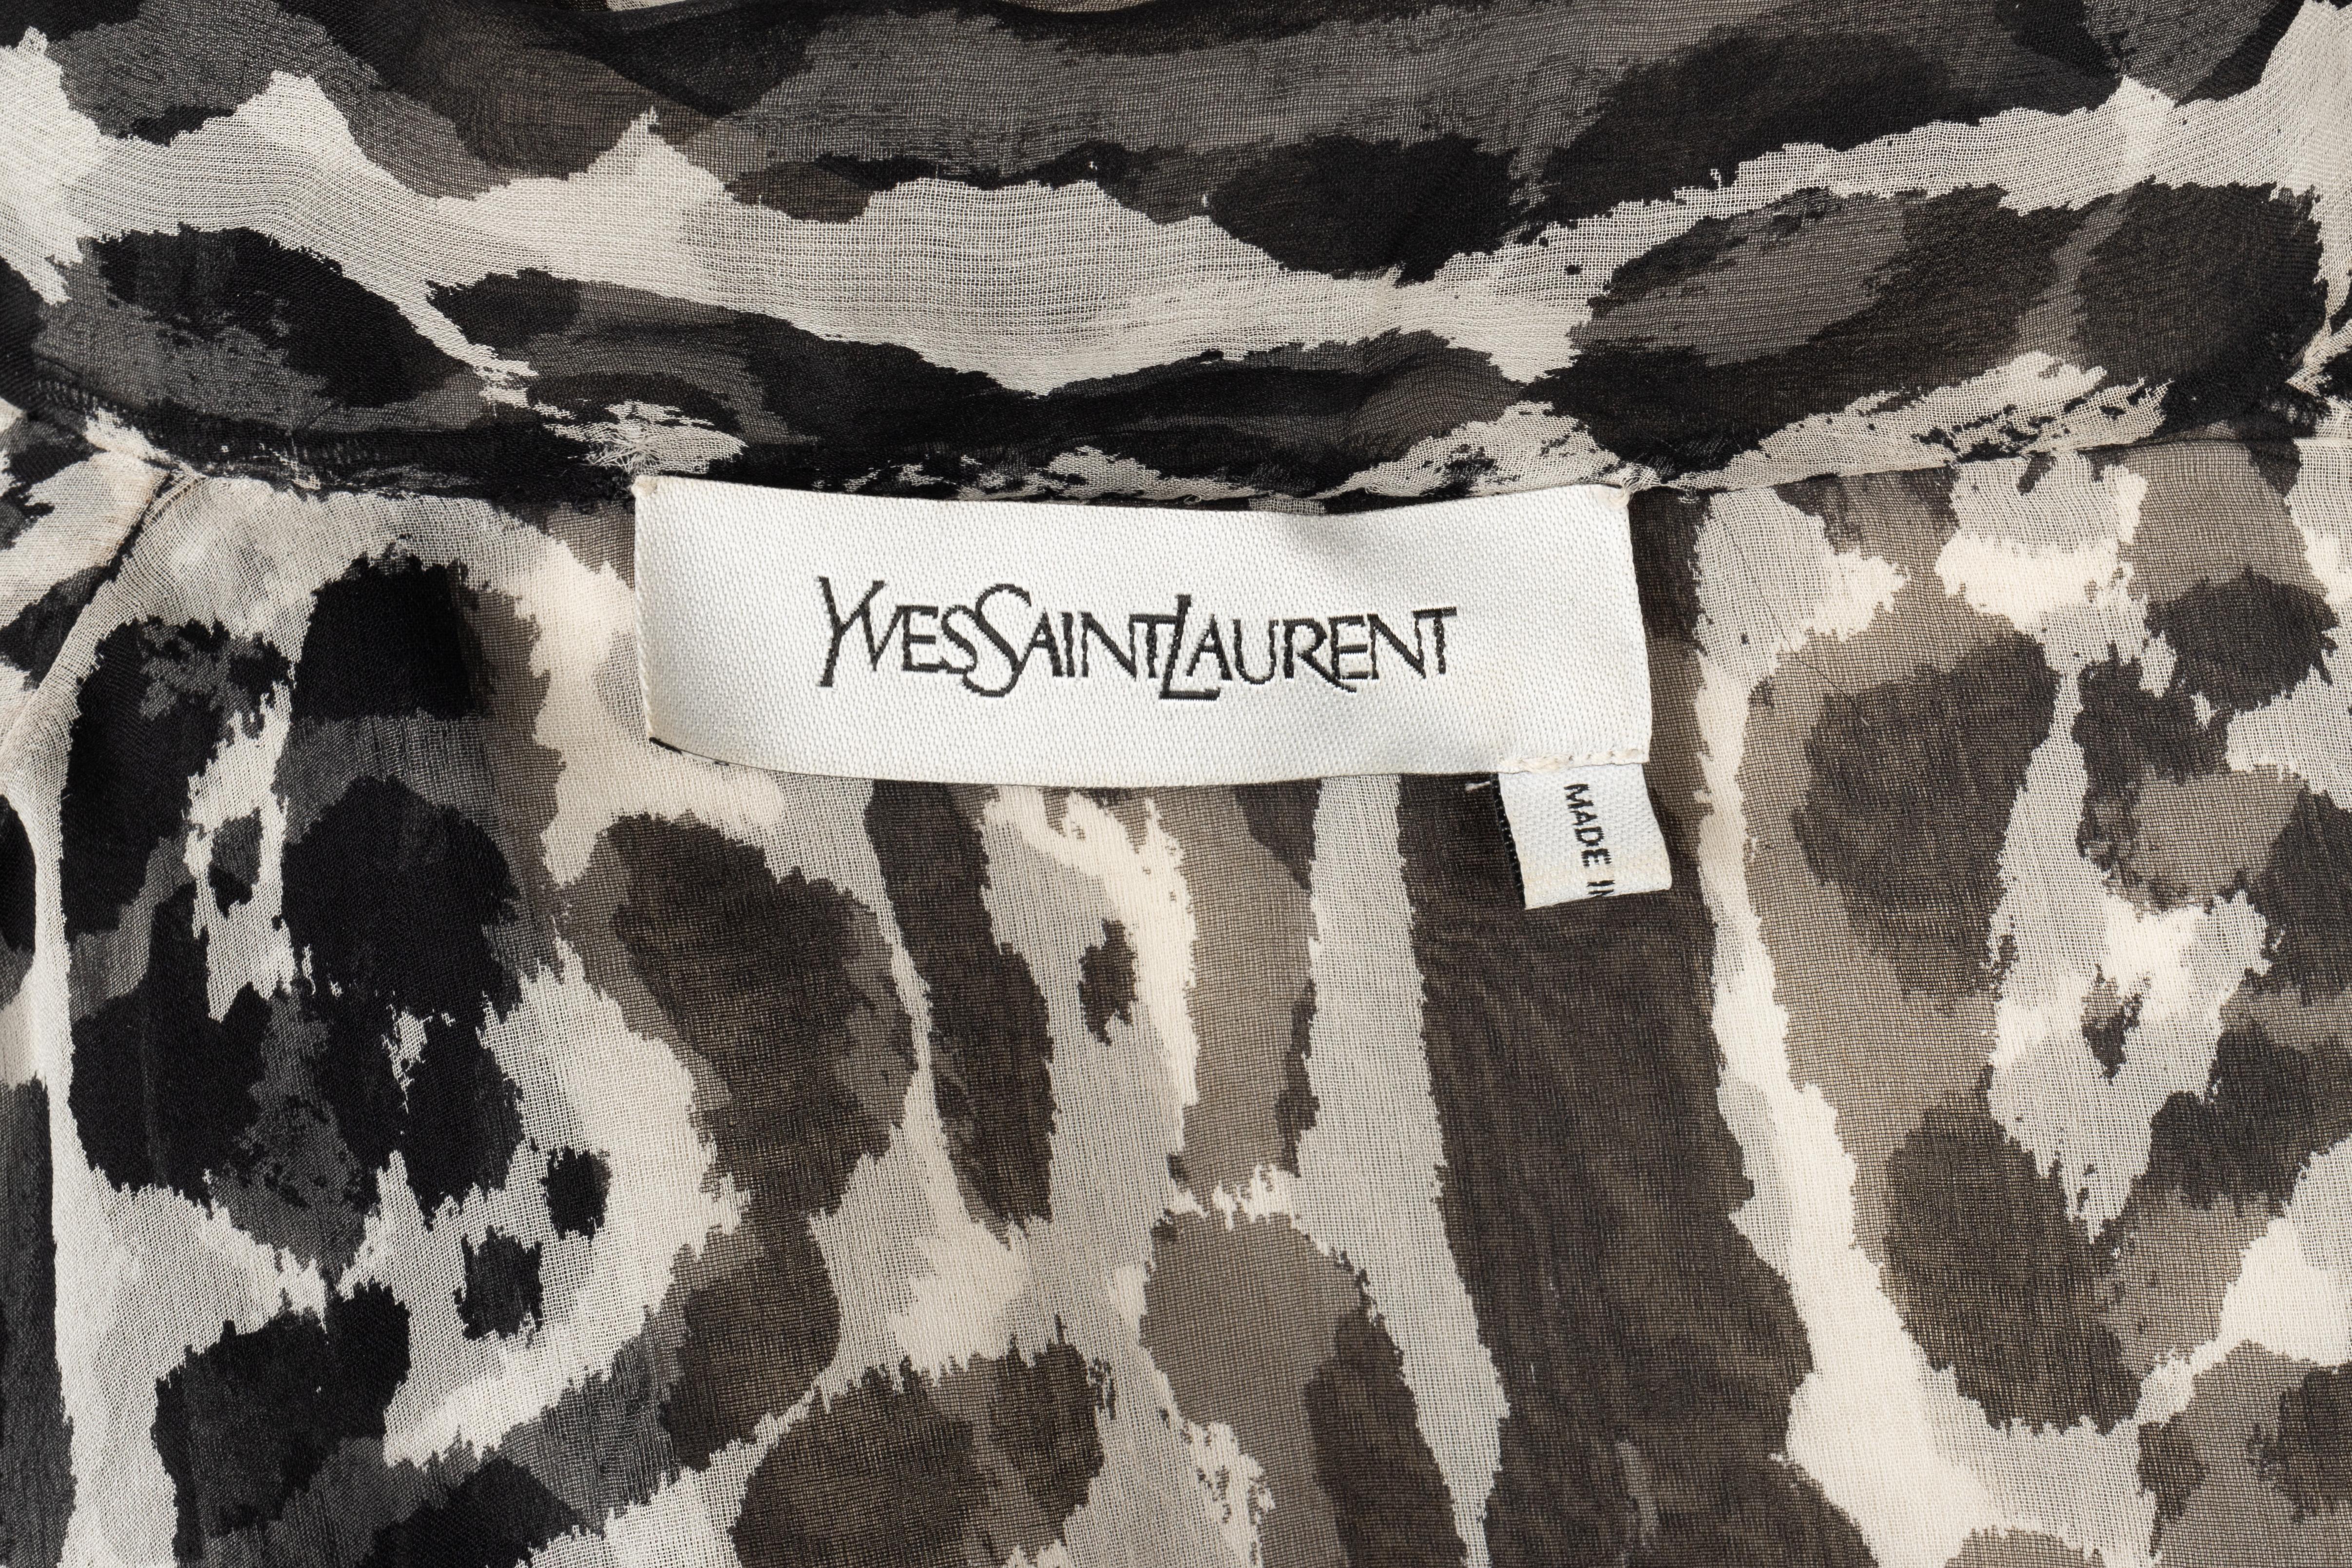 YVES SAINT LAURENT - (Made in Italy) Grey muslin blouse printed with panther pattern. No size label, it fits a 36FR/38FR.

Condition:
Very good condition

Dimensions:
Shoulder width: 36 cm - Sleeve length: 72 cm

FH160